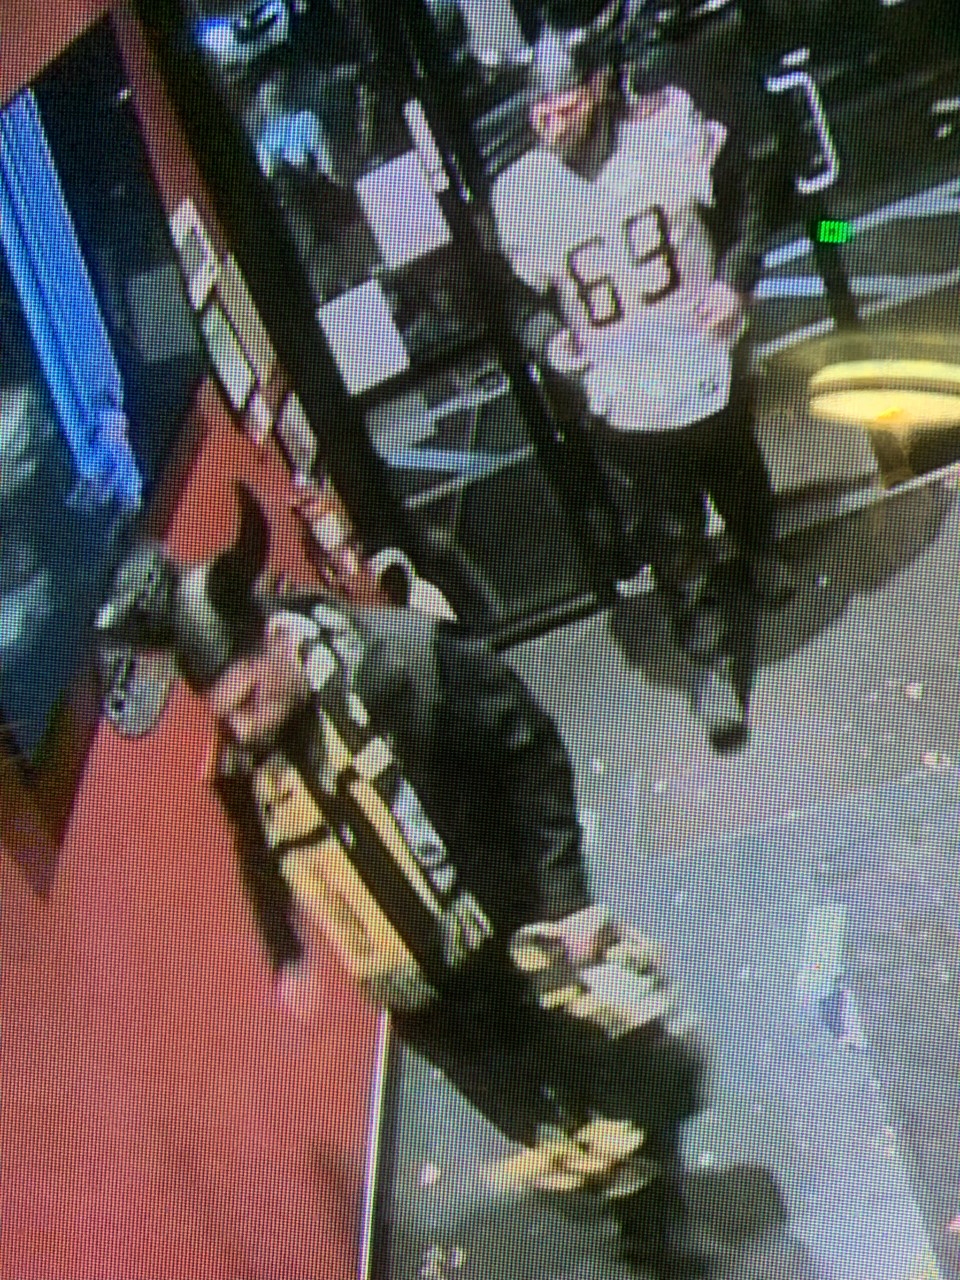 Man seen in video punching flat screen TV at EndZone Bar & Grill following Sunday's Grey Cup game .